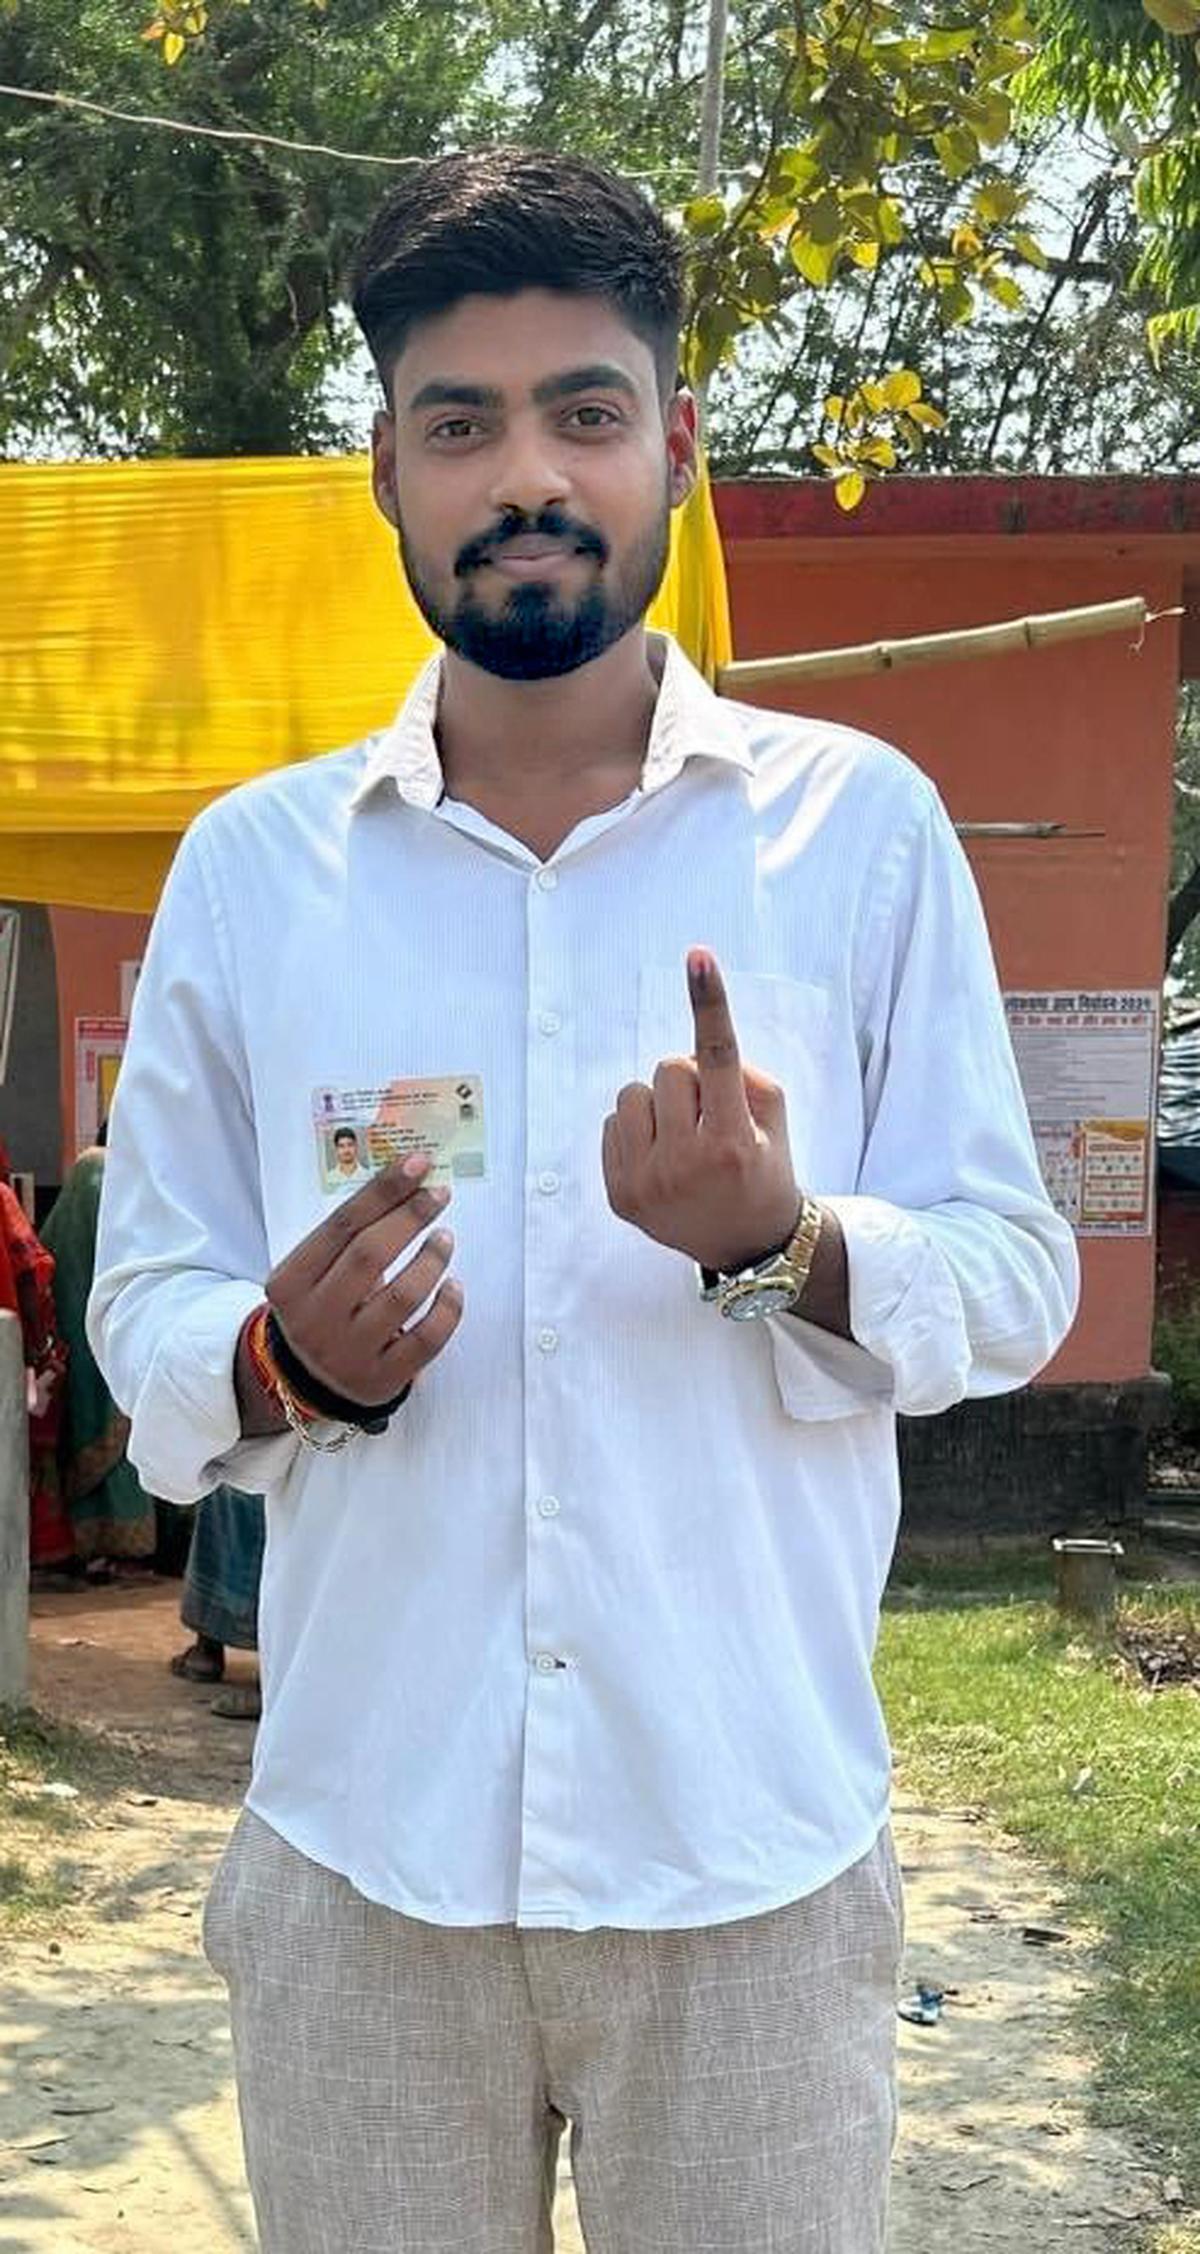 Raj shows his inked finger and voter ID after sporting the franchise for the first time.